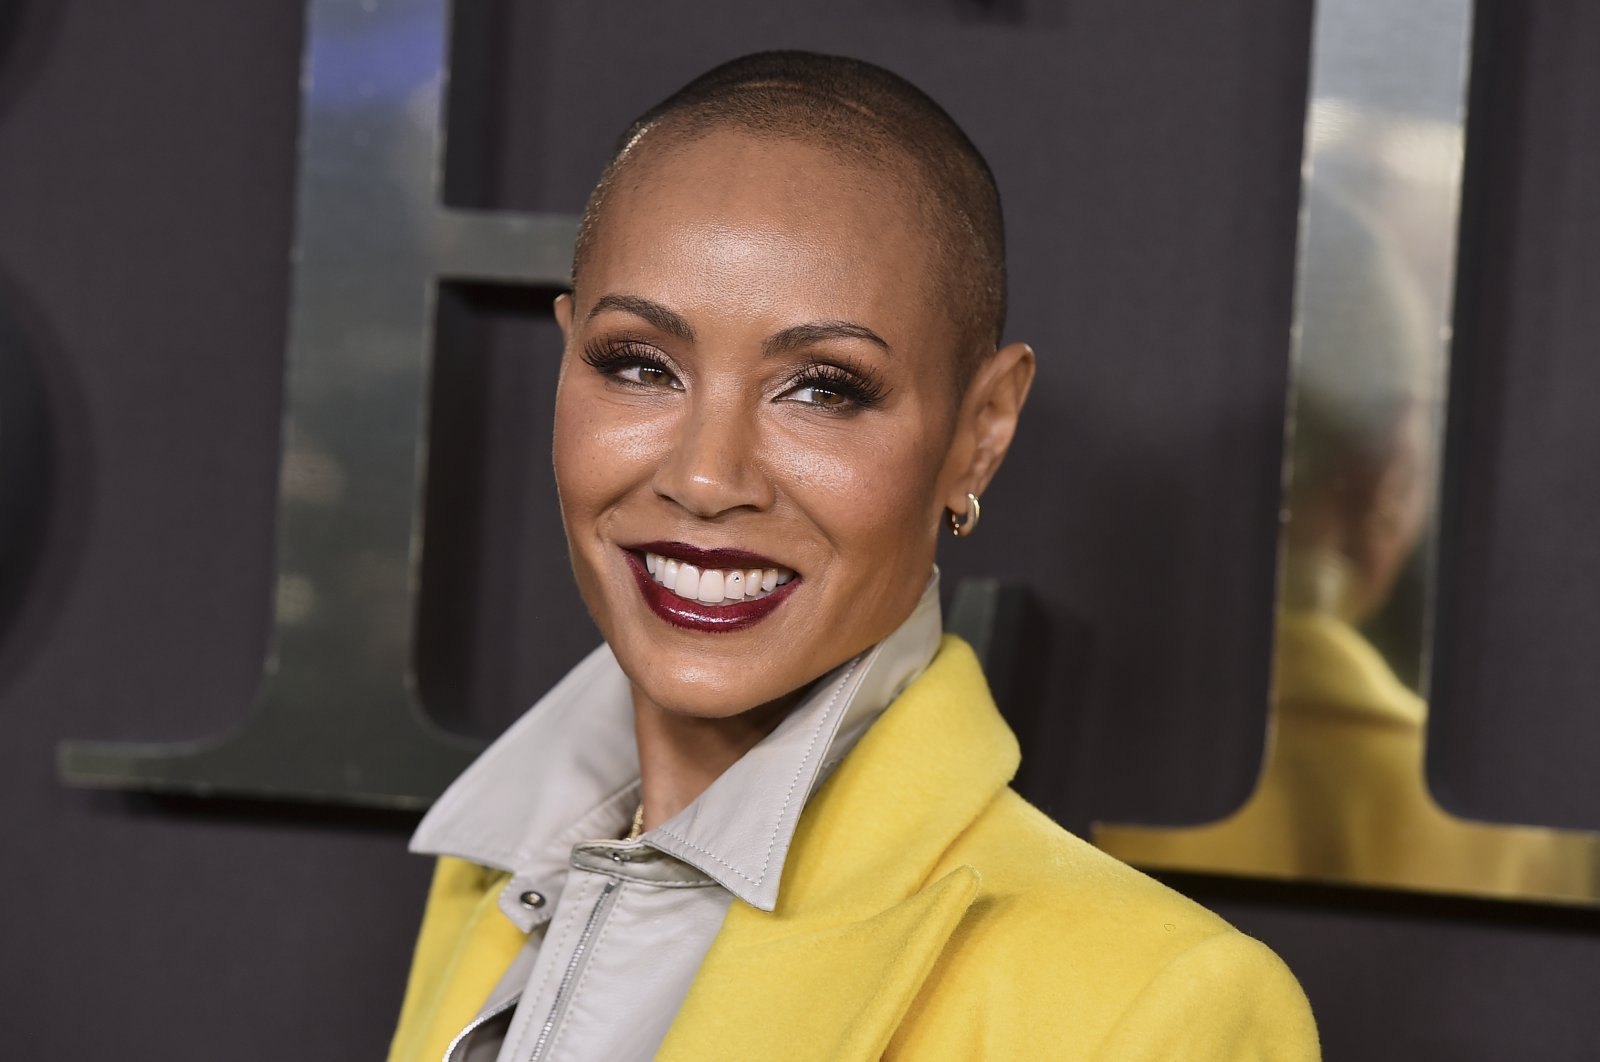 Jada Pinkett Smith arrives at the premiere of &quot;Bel-Air&quot; in Santa Monica, California, U.S., Feb. 9, 2022. Pinkett Smith has a book deal with Dey Street Books for a memoir. The book is currently untitled and scheduled for next fall. (AP File Photo)